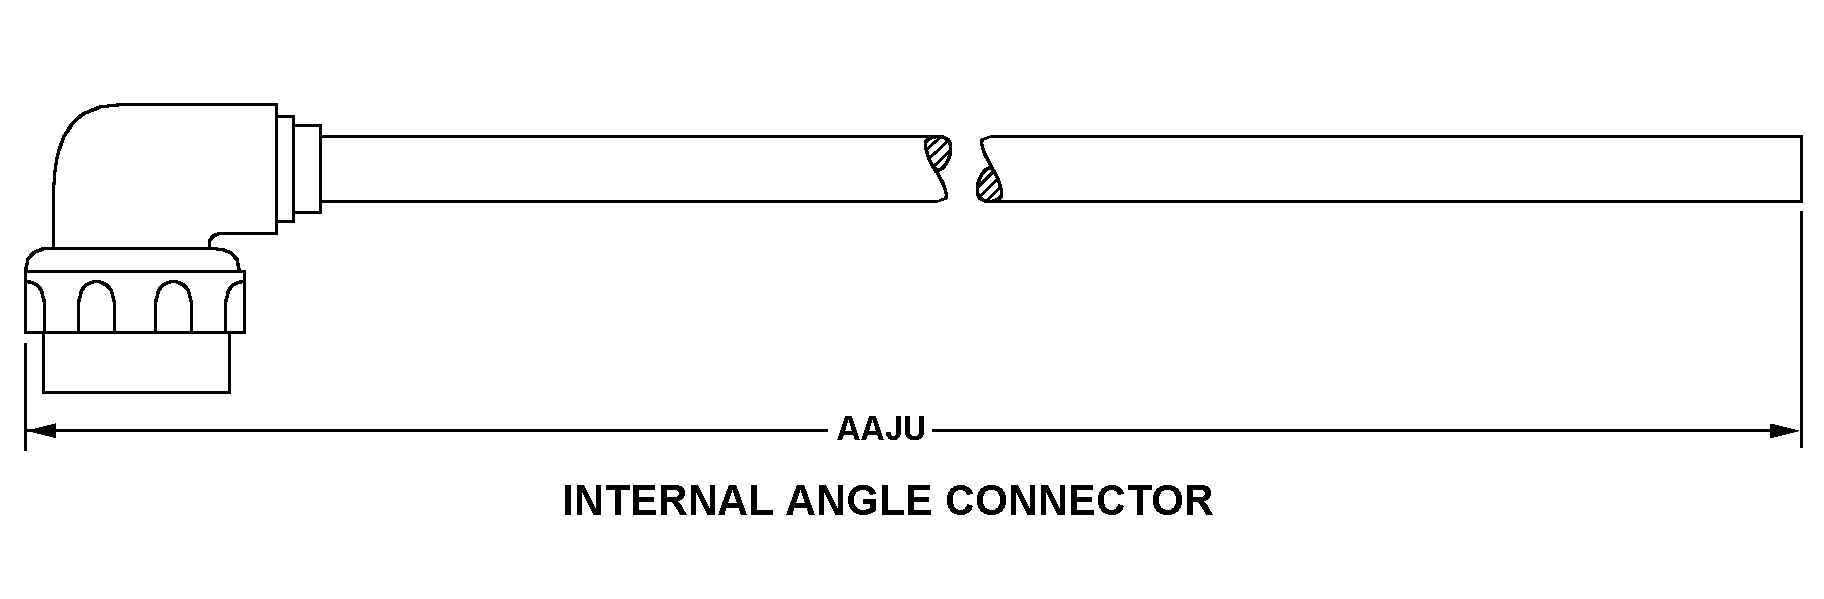 INTERNAL ANGLE CONNECTOR style nsn 5995-00-823-2601